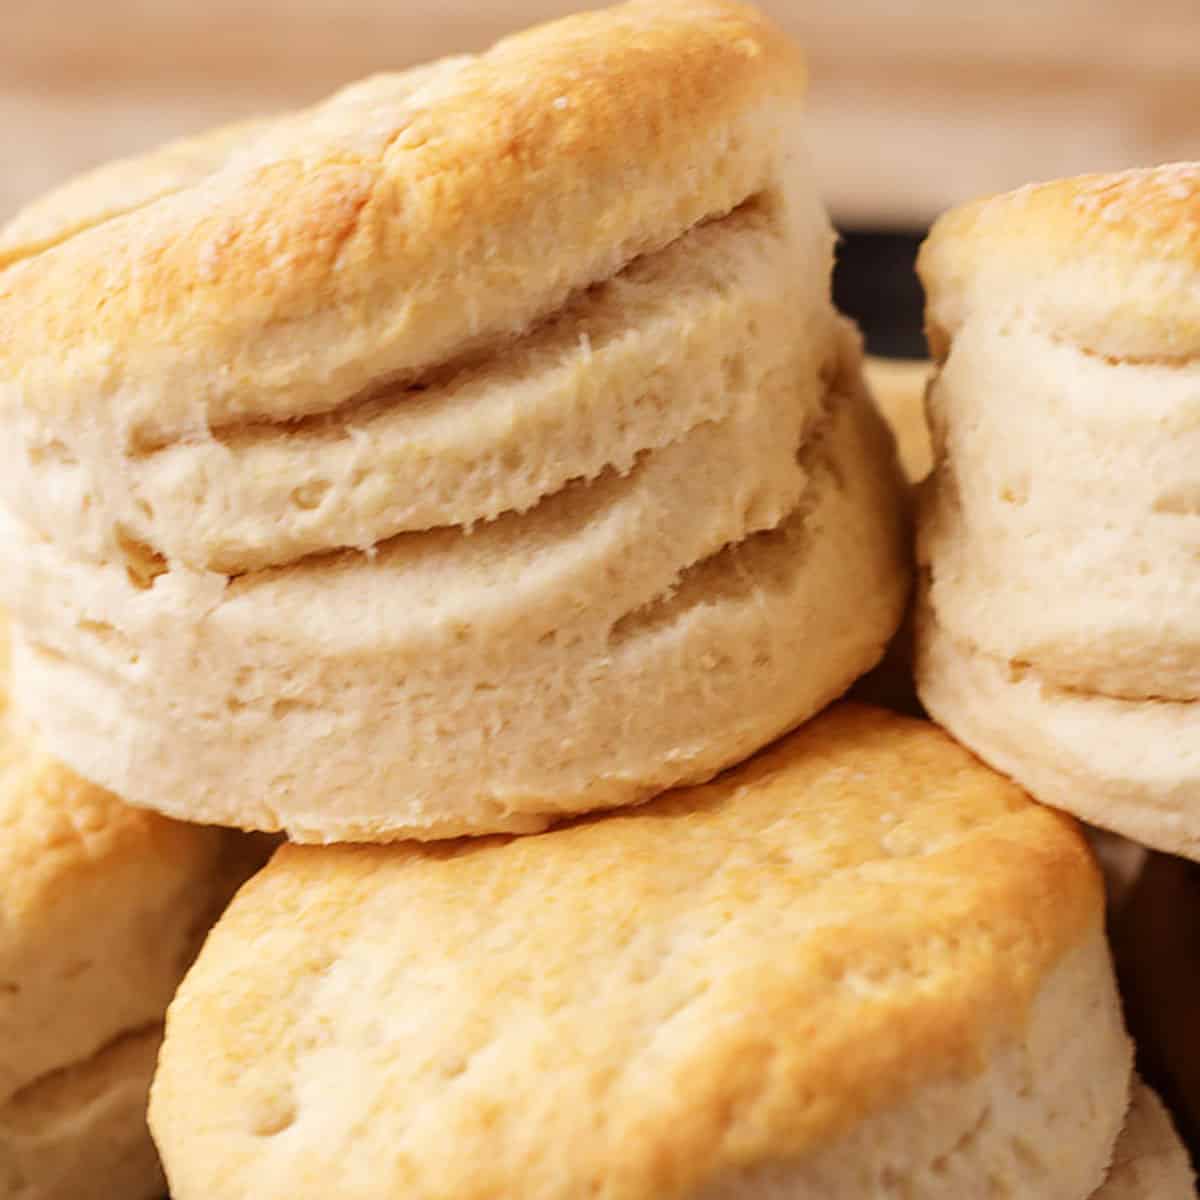 Large stack of homemade biscuits on cast iron.